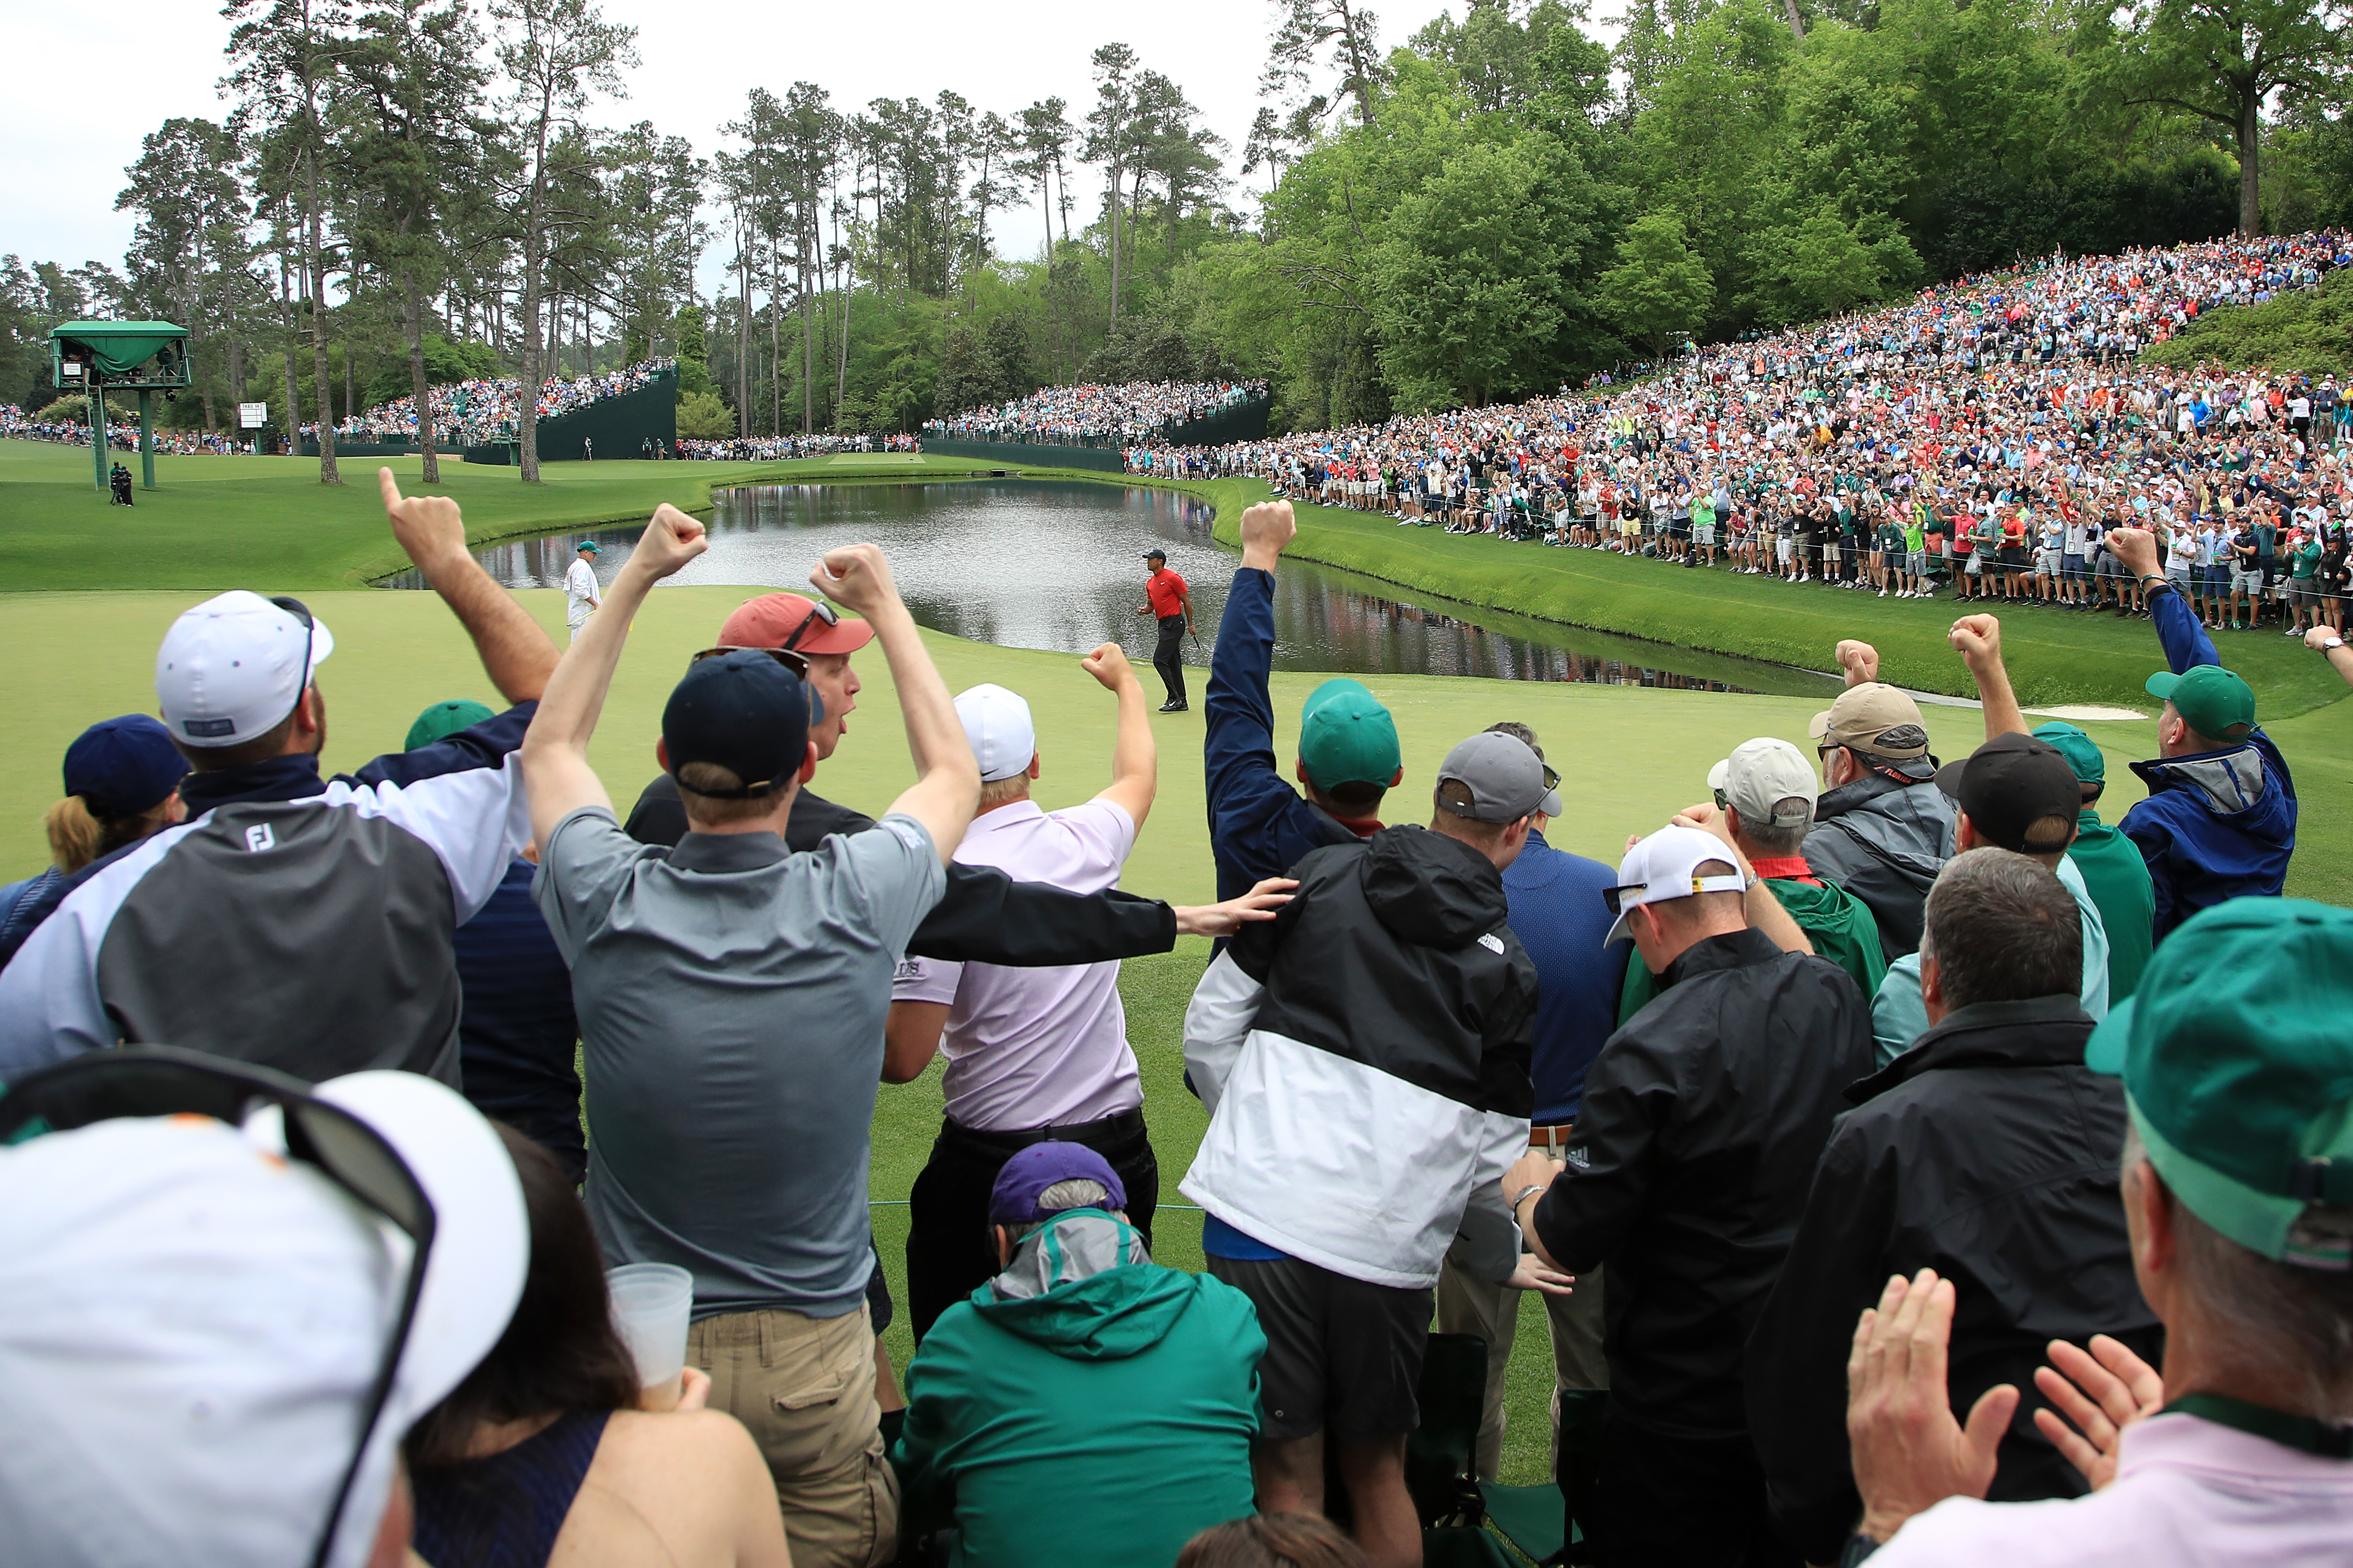 Tiger Woods wins 15th career major at The Masters